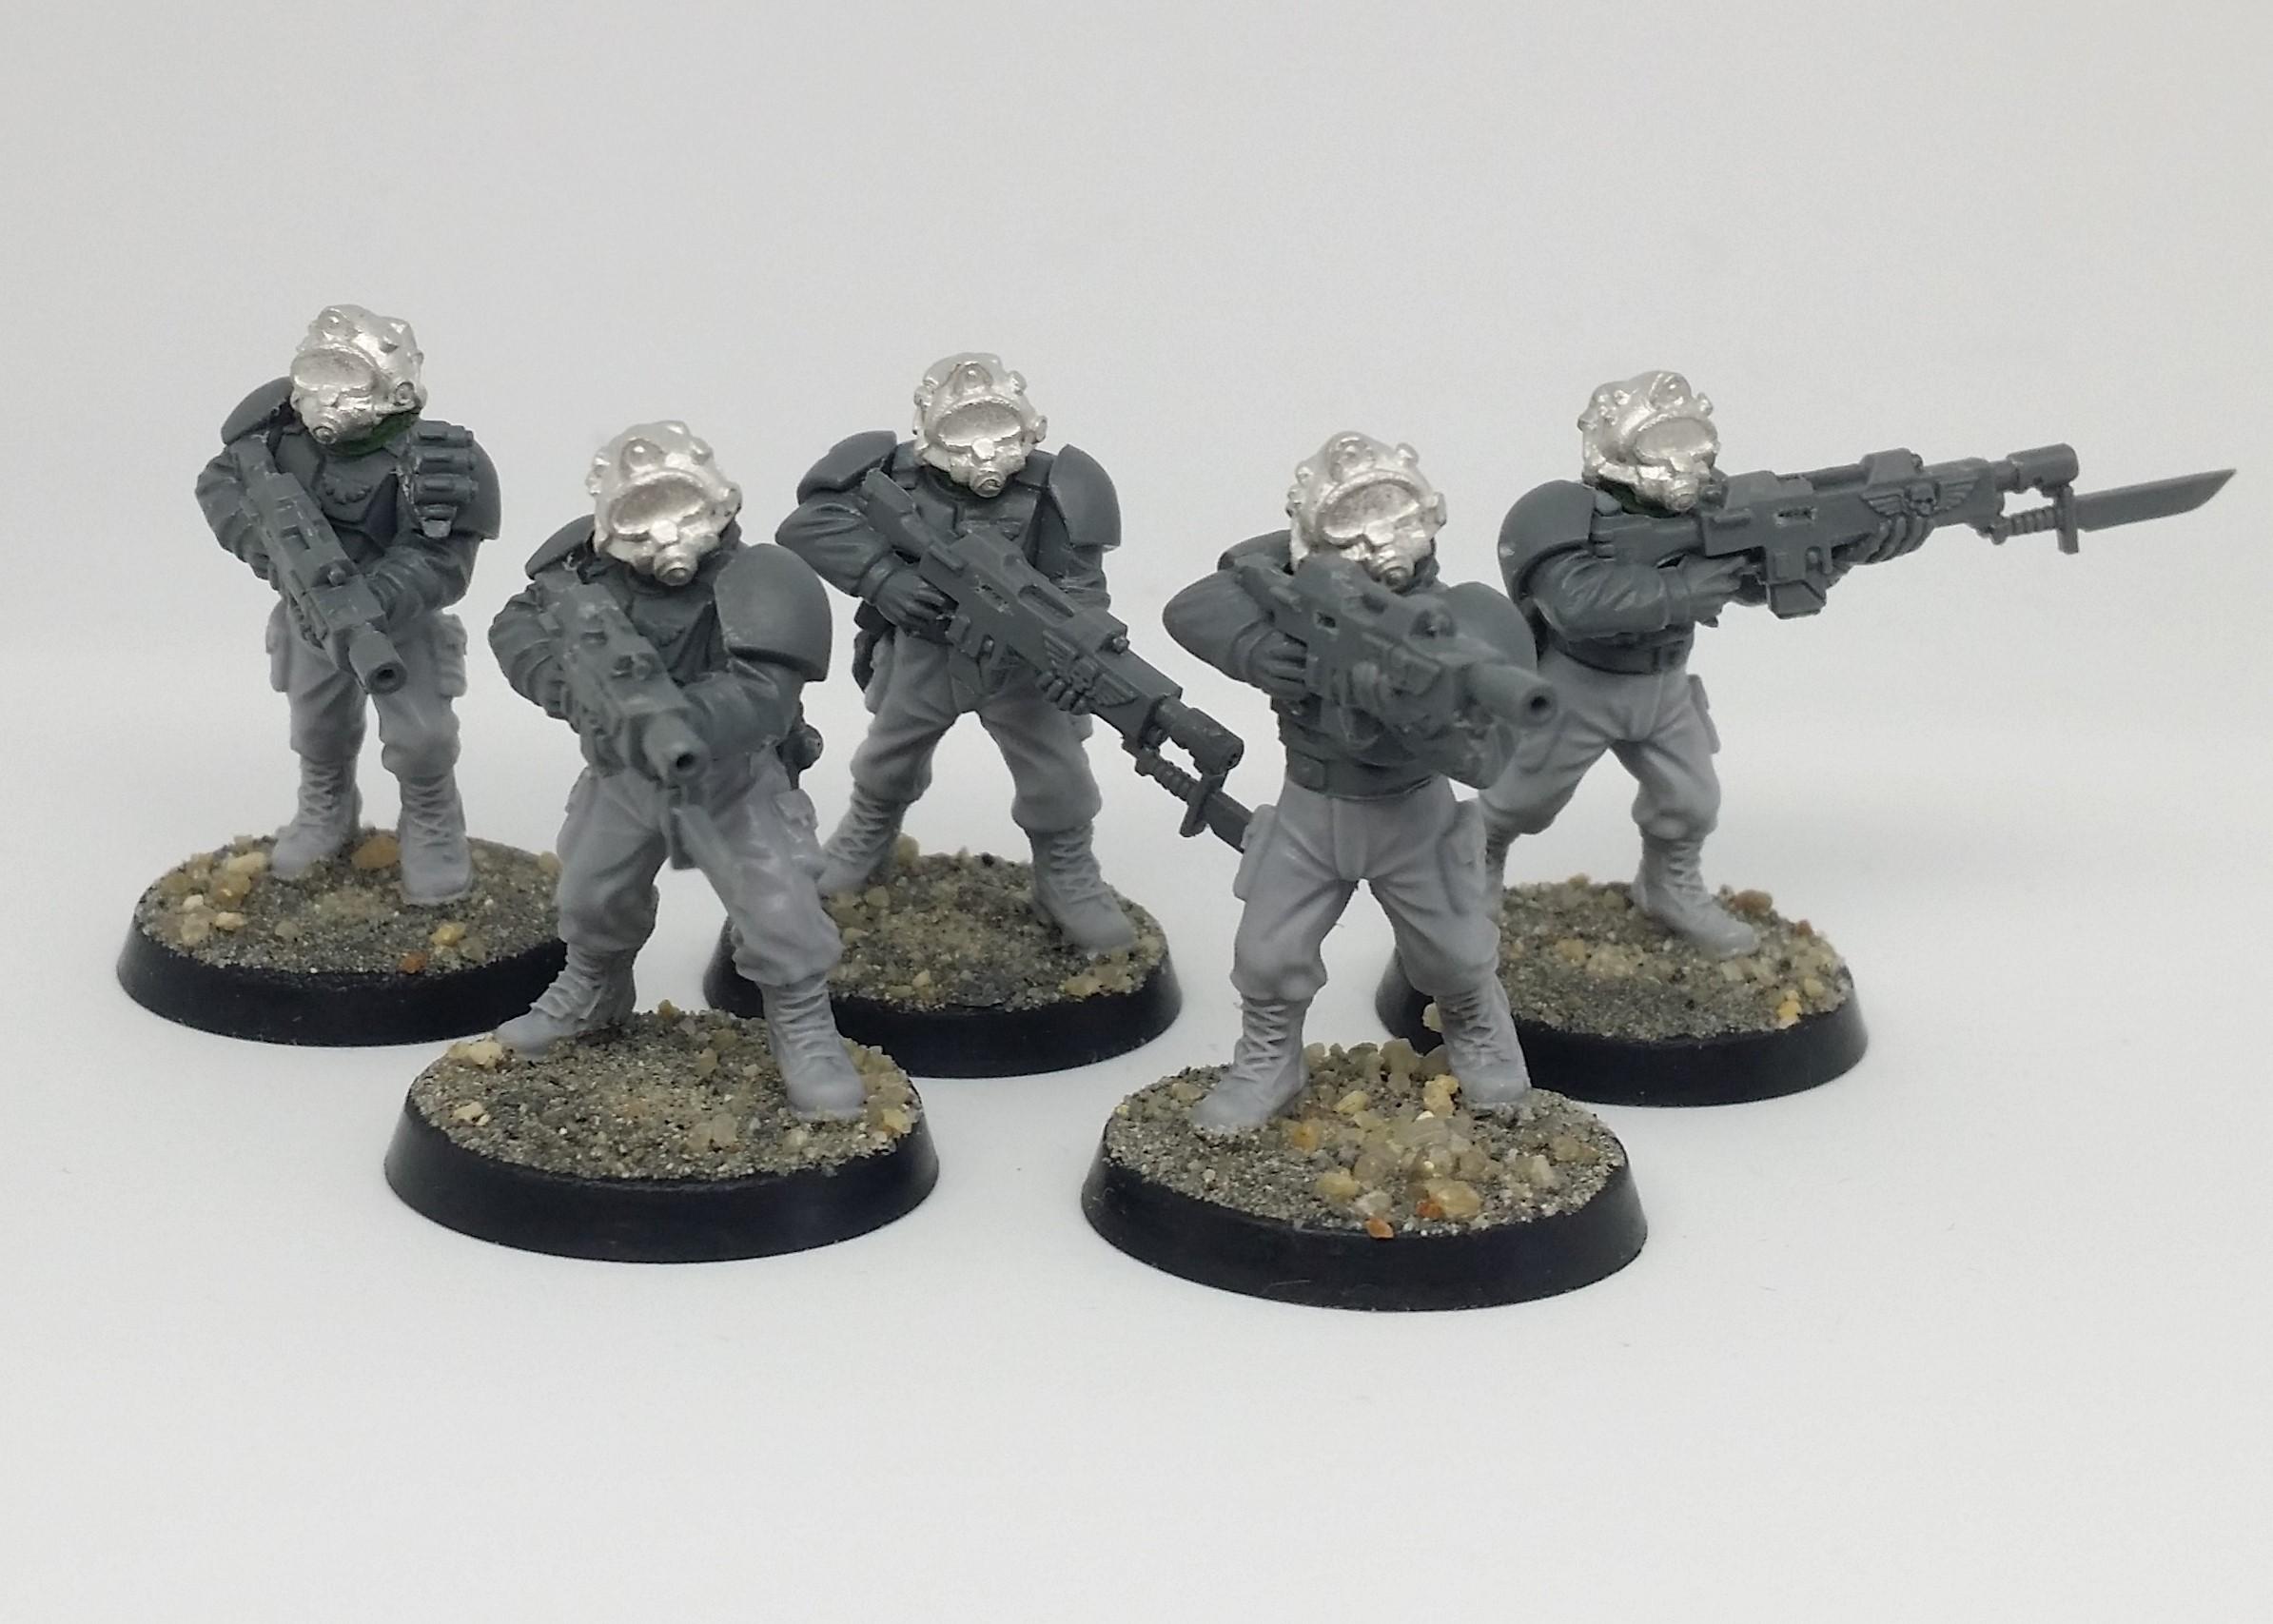 Armsman, Astra, Autogun, Conversion, Crew, Fleet, Imperial, Navy, Pilot, Ratings, Rebreather, Sealed, Ship. Void, Suit, Troopers